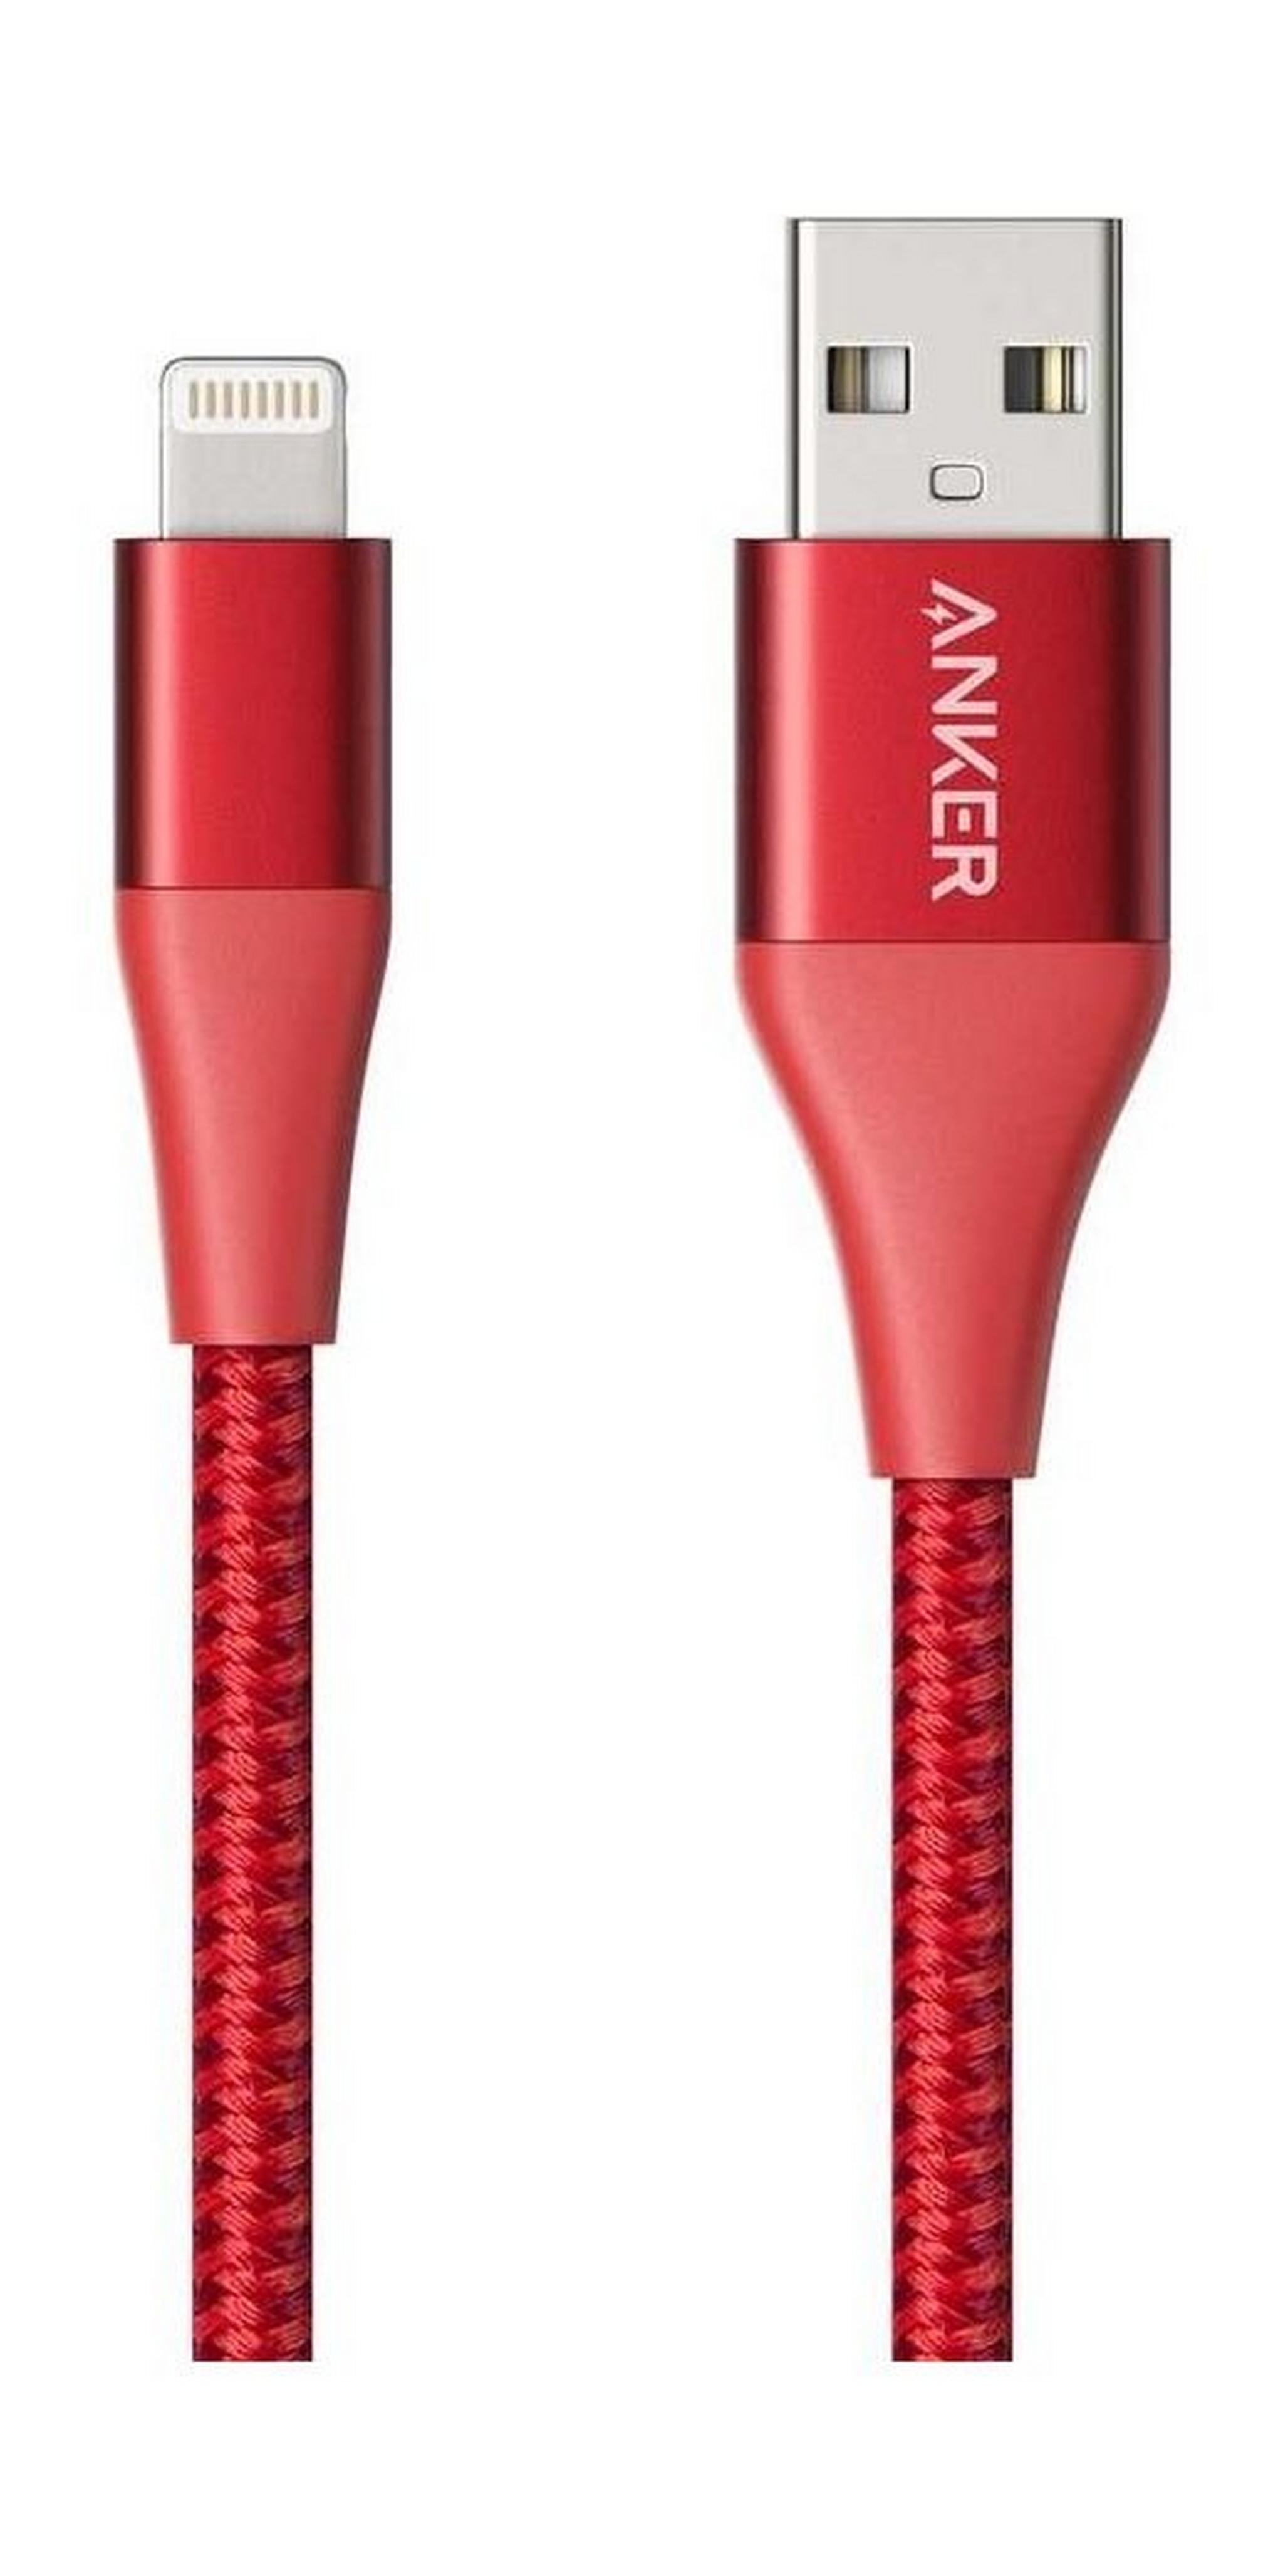 Anker PowerLine II 0.9-M Lightning Cable (A8452H91) - Red